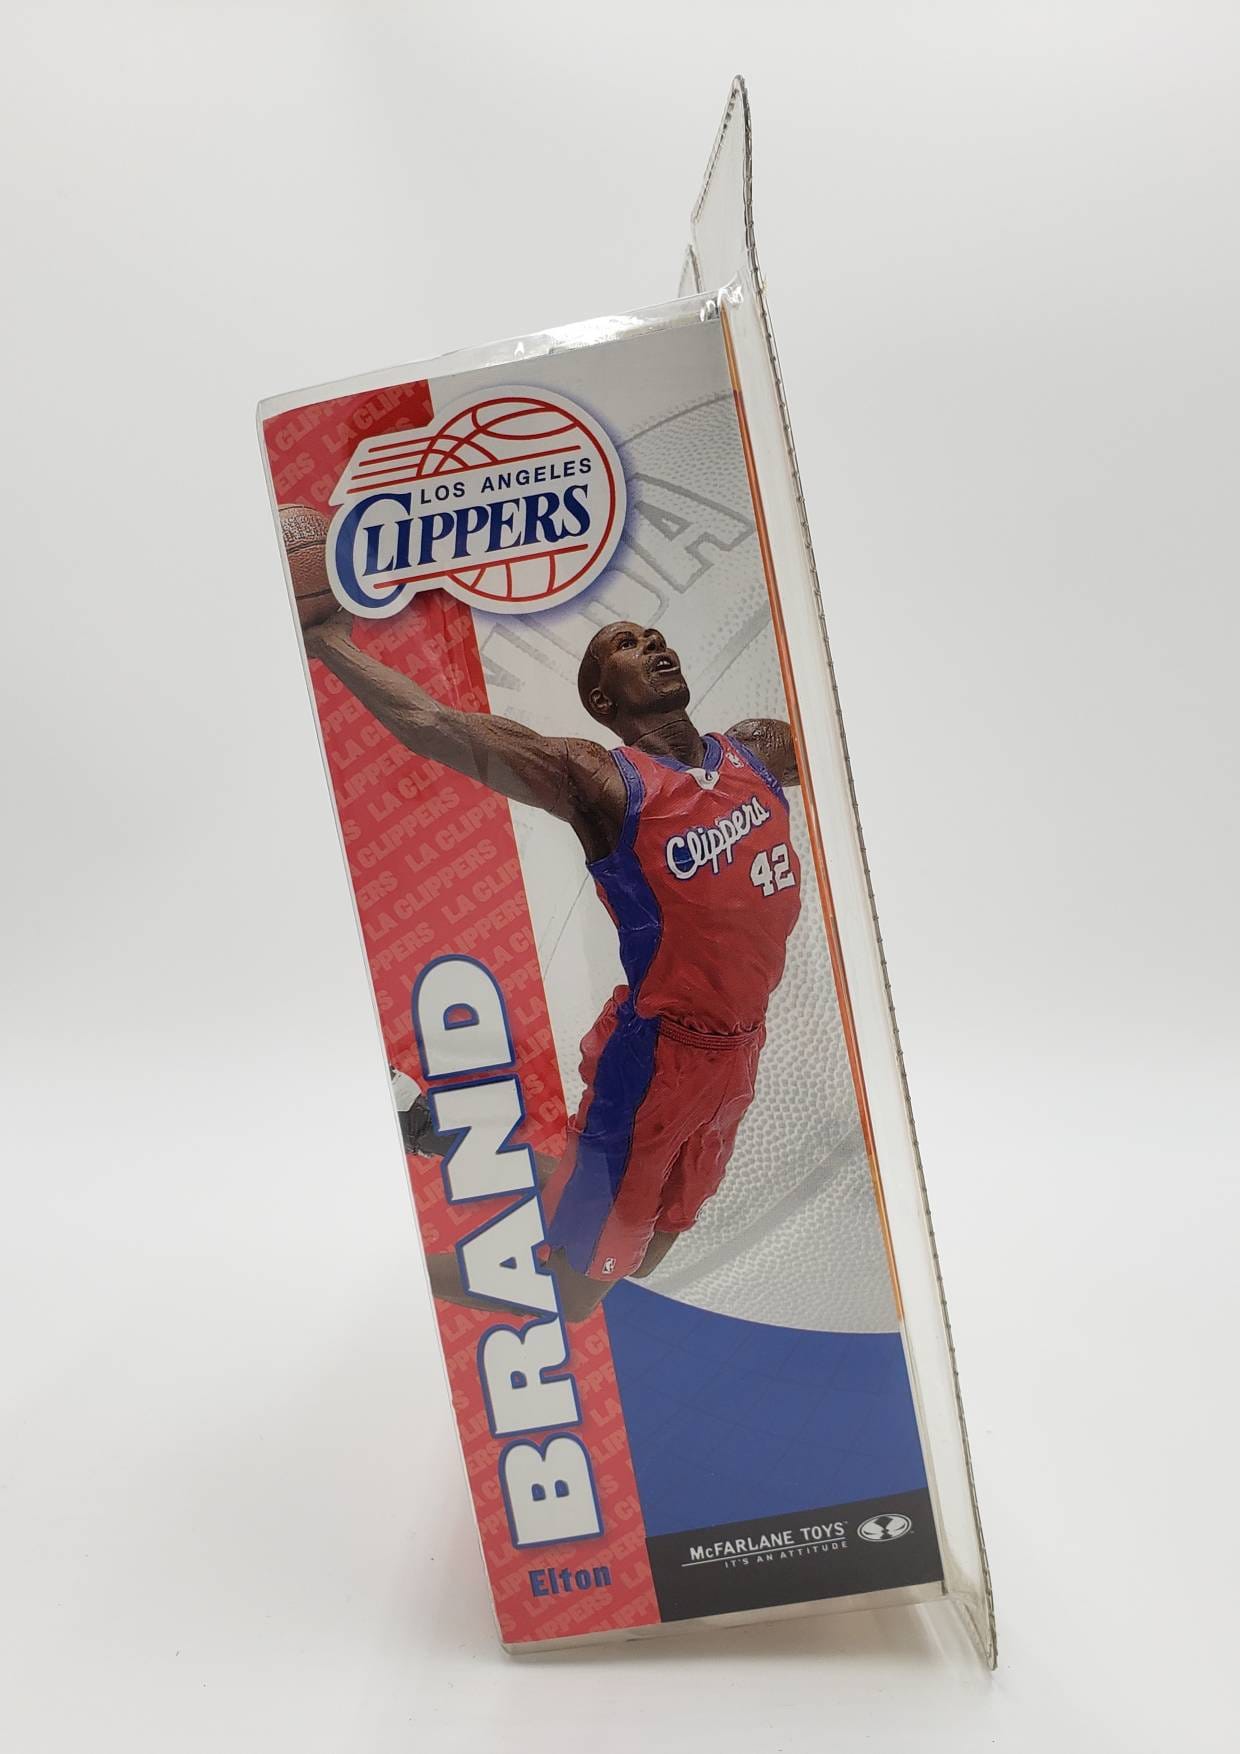 McFarlane Toys Elton Brand Los Angeles Clippers White Uniform Series 2 Collectable NBA Basketball Action Figure Perfect Birthday Gift